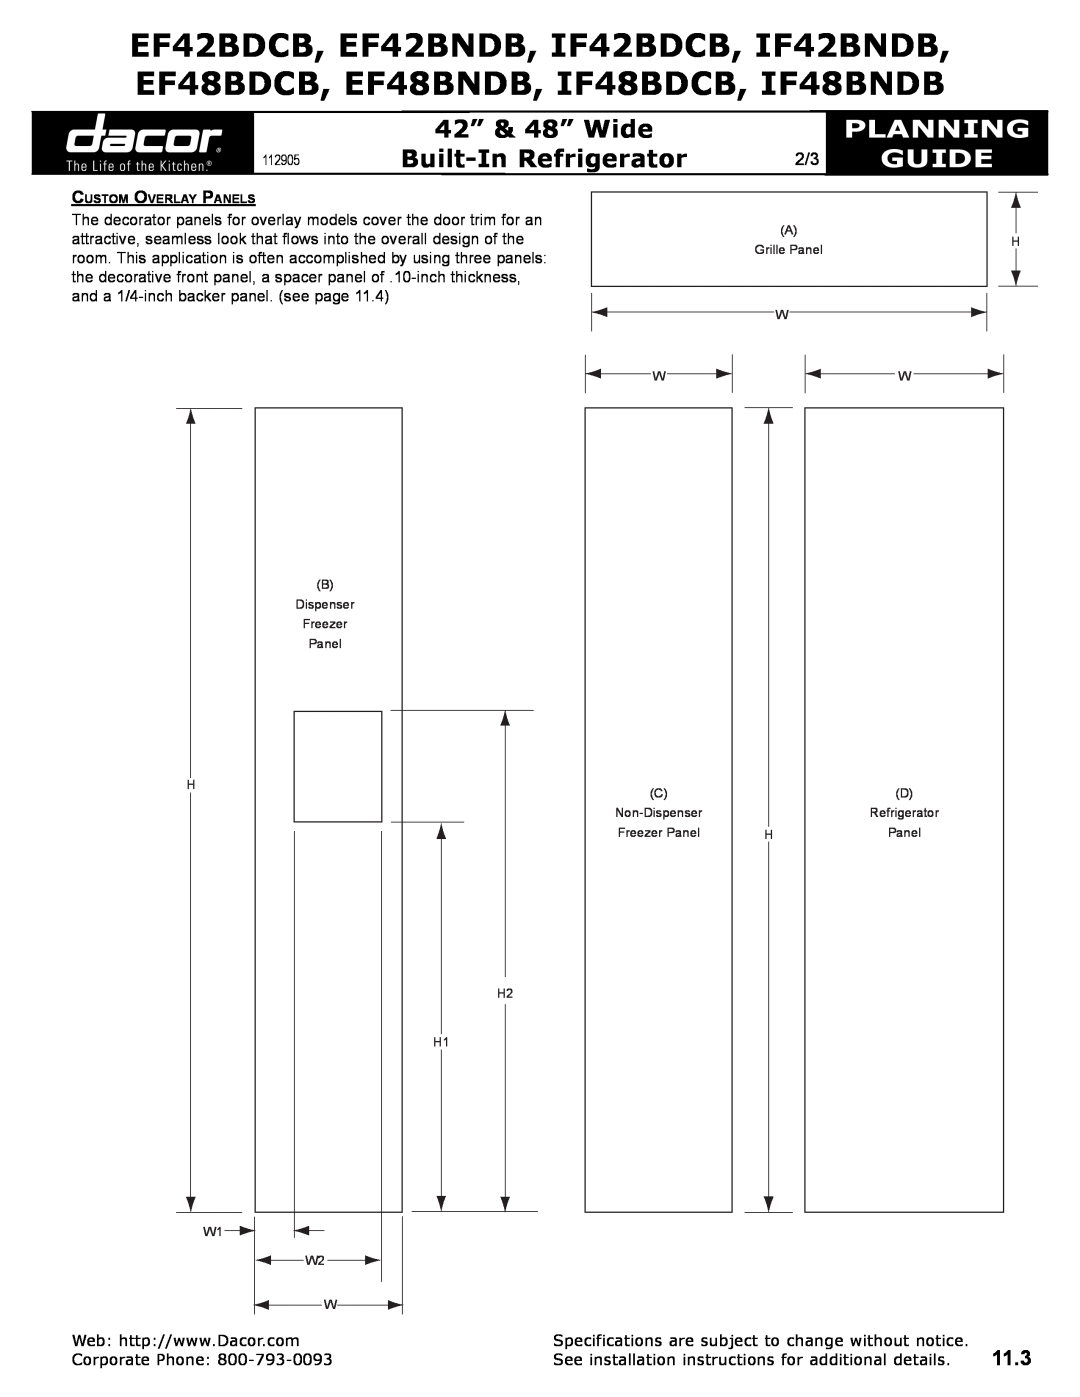 Dacor EF48BDCB, IF42BNDB, IF48BDCB, EF48BNDB, IF48BNDB, IF42BDCB 11.3, 42” & 48” Wide, Planning, Guide, Built-In Refrigerator 